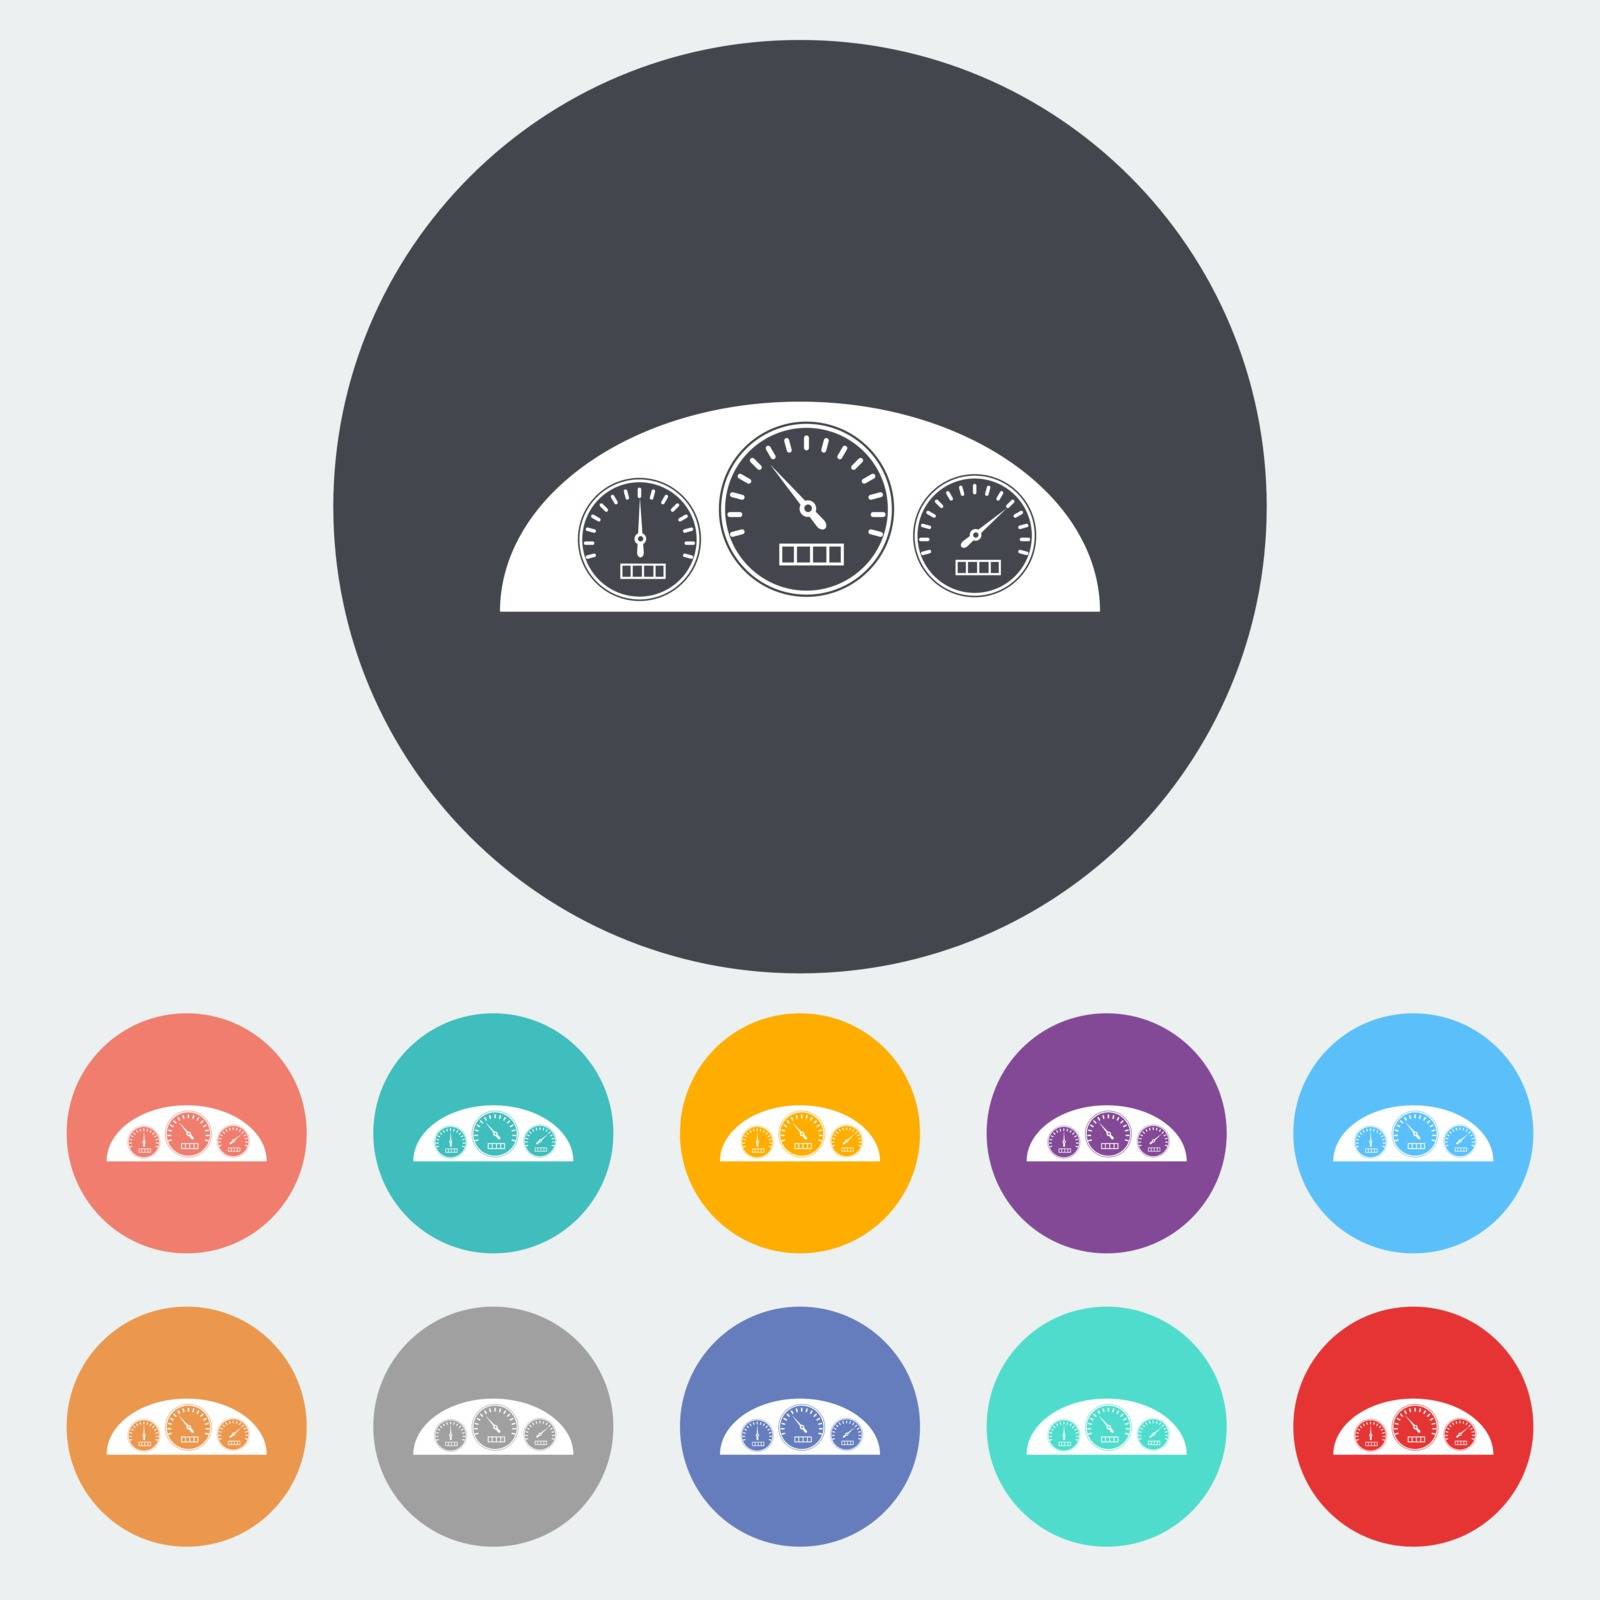 Dashboard. Single flat icon on the circle. Vector illustration.